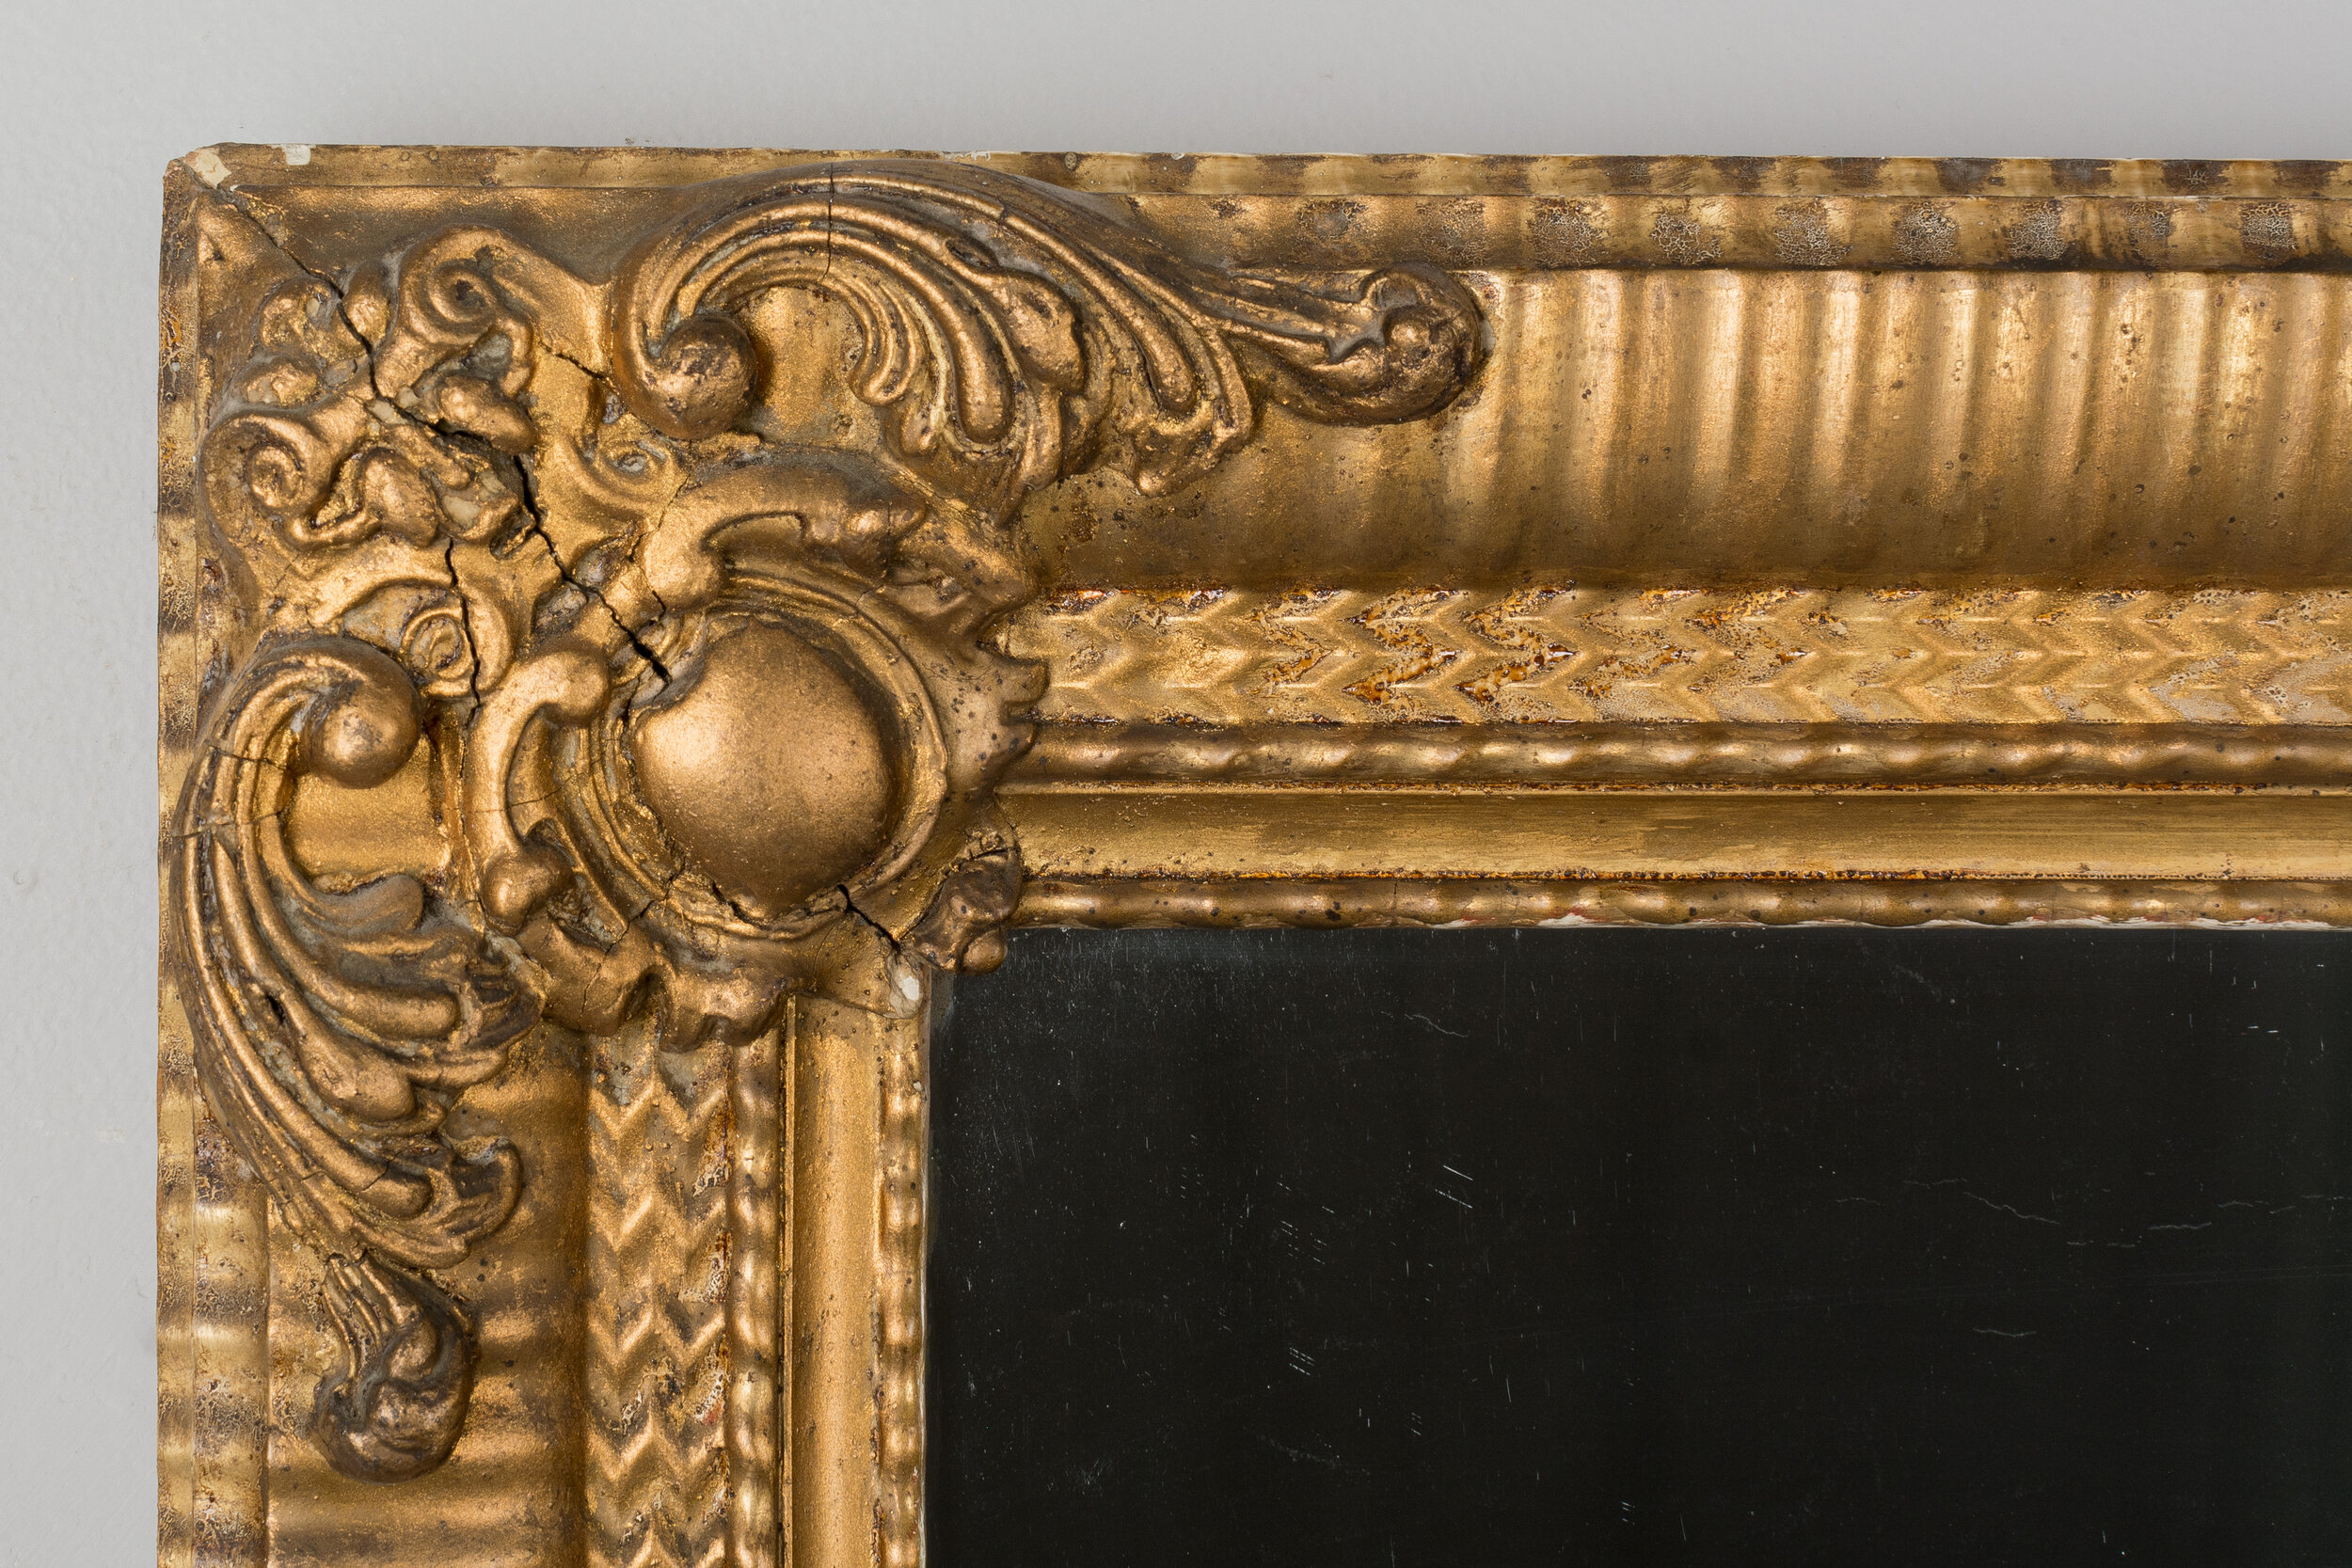 Large Louis Philippe Golden Mirror, Italy, 19th Century for sale at Pamono